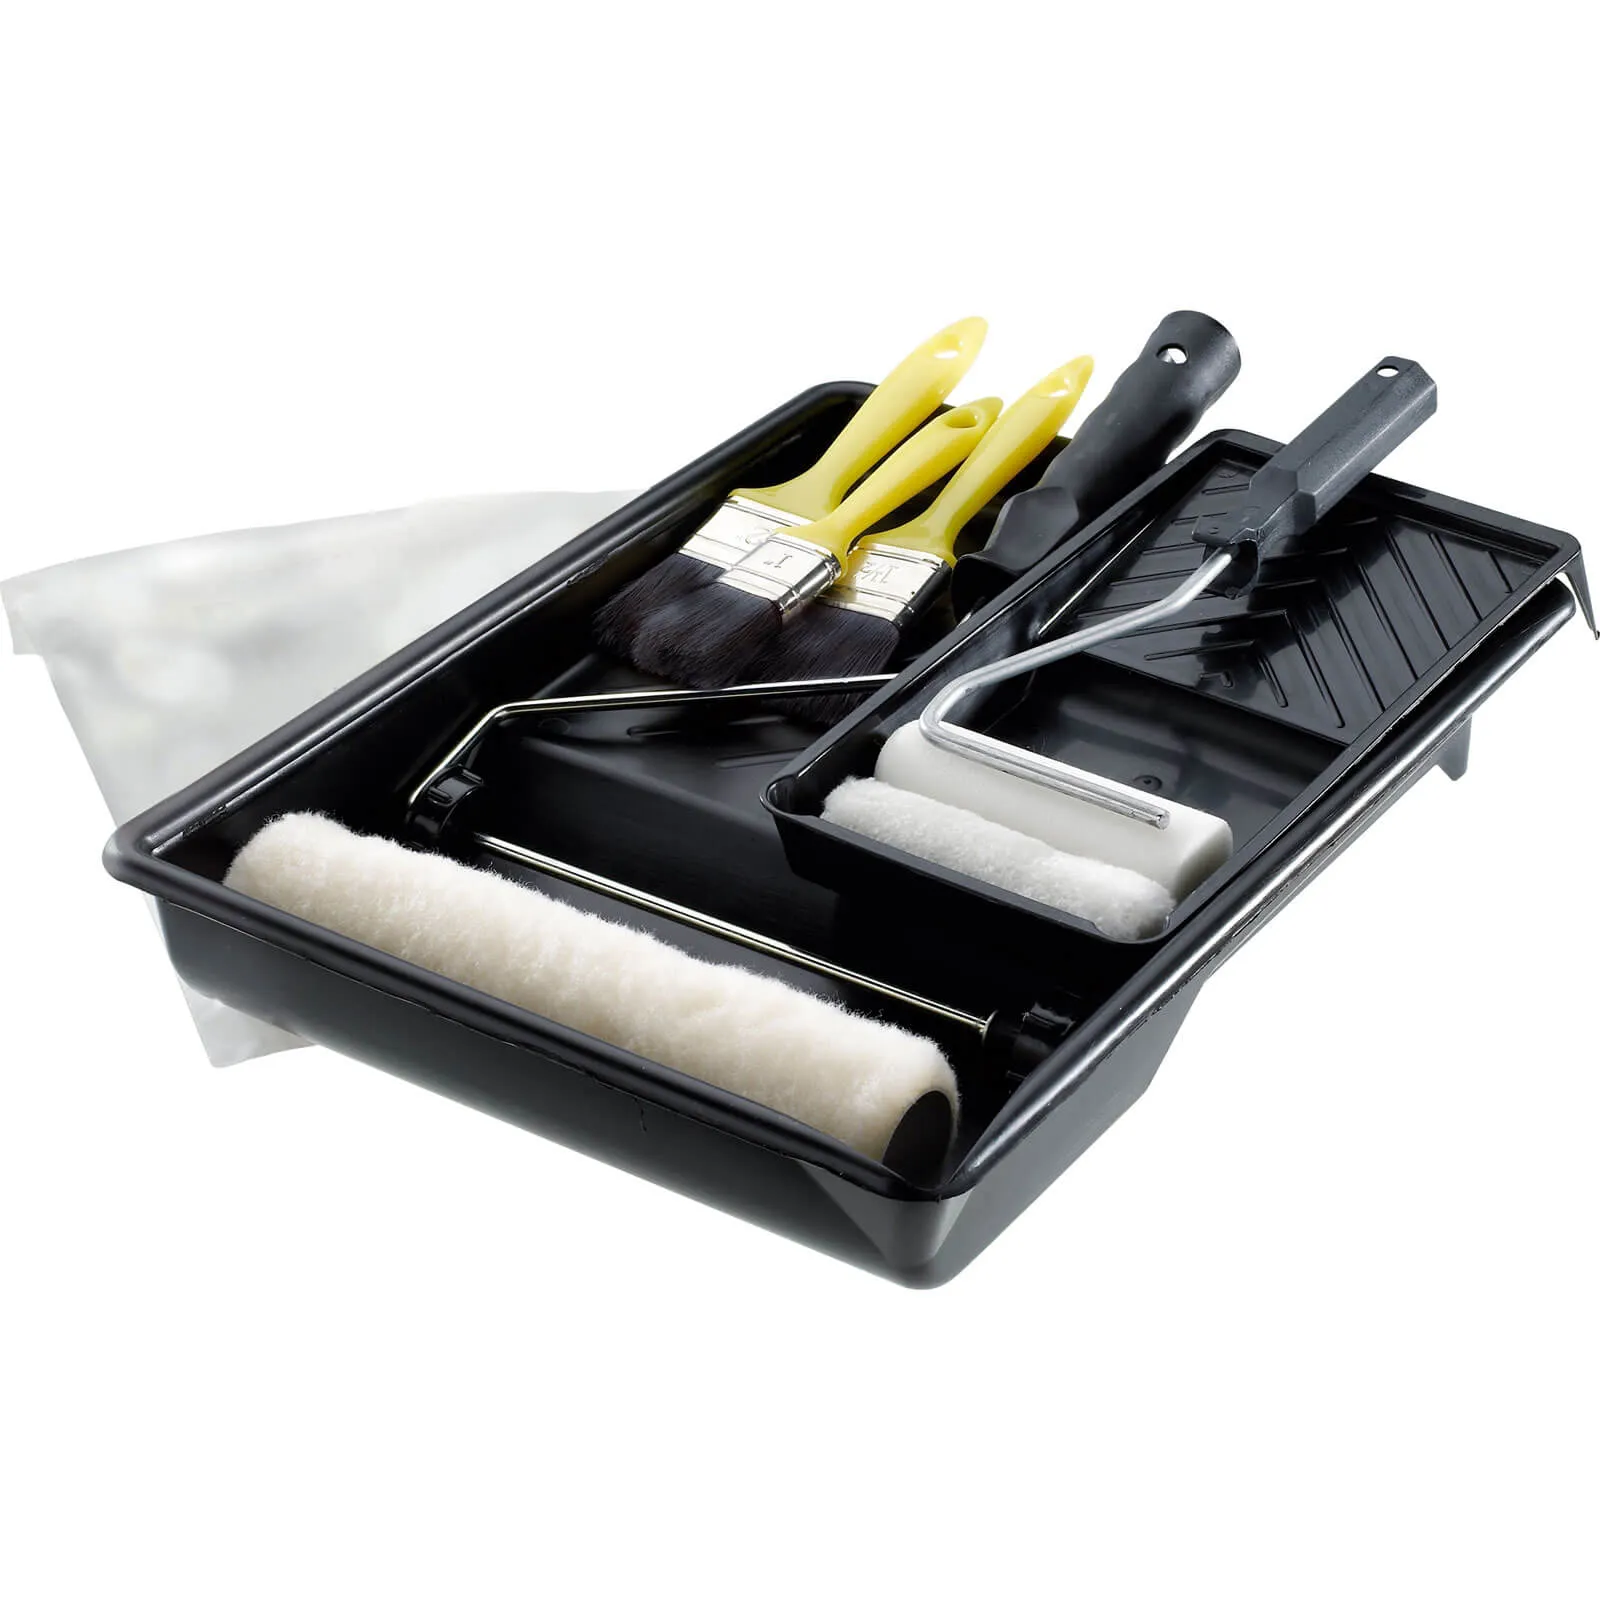 Stanley 10 Piece Painting and Decorating Tool Set